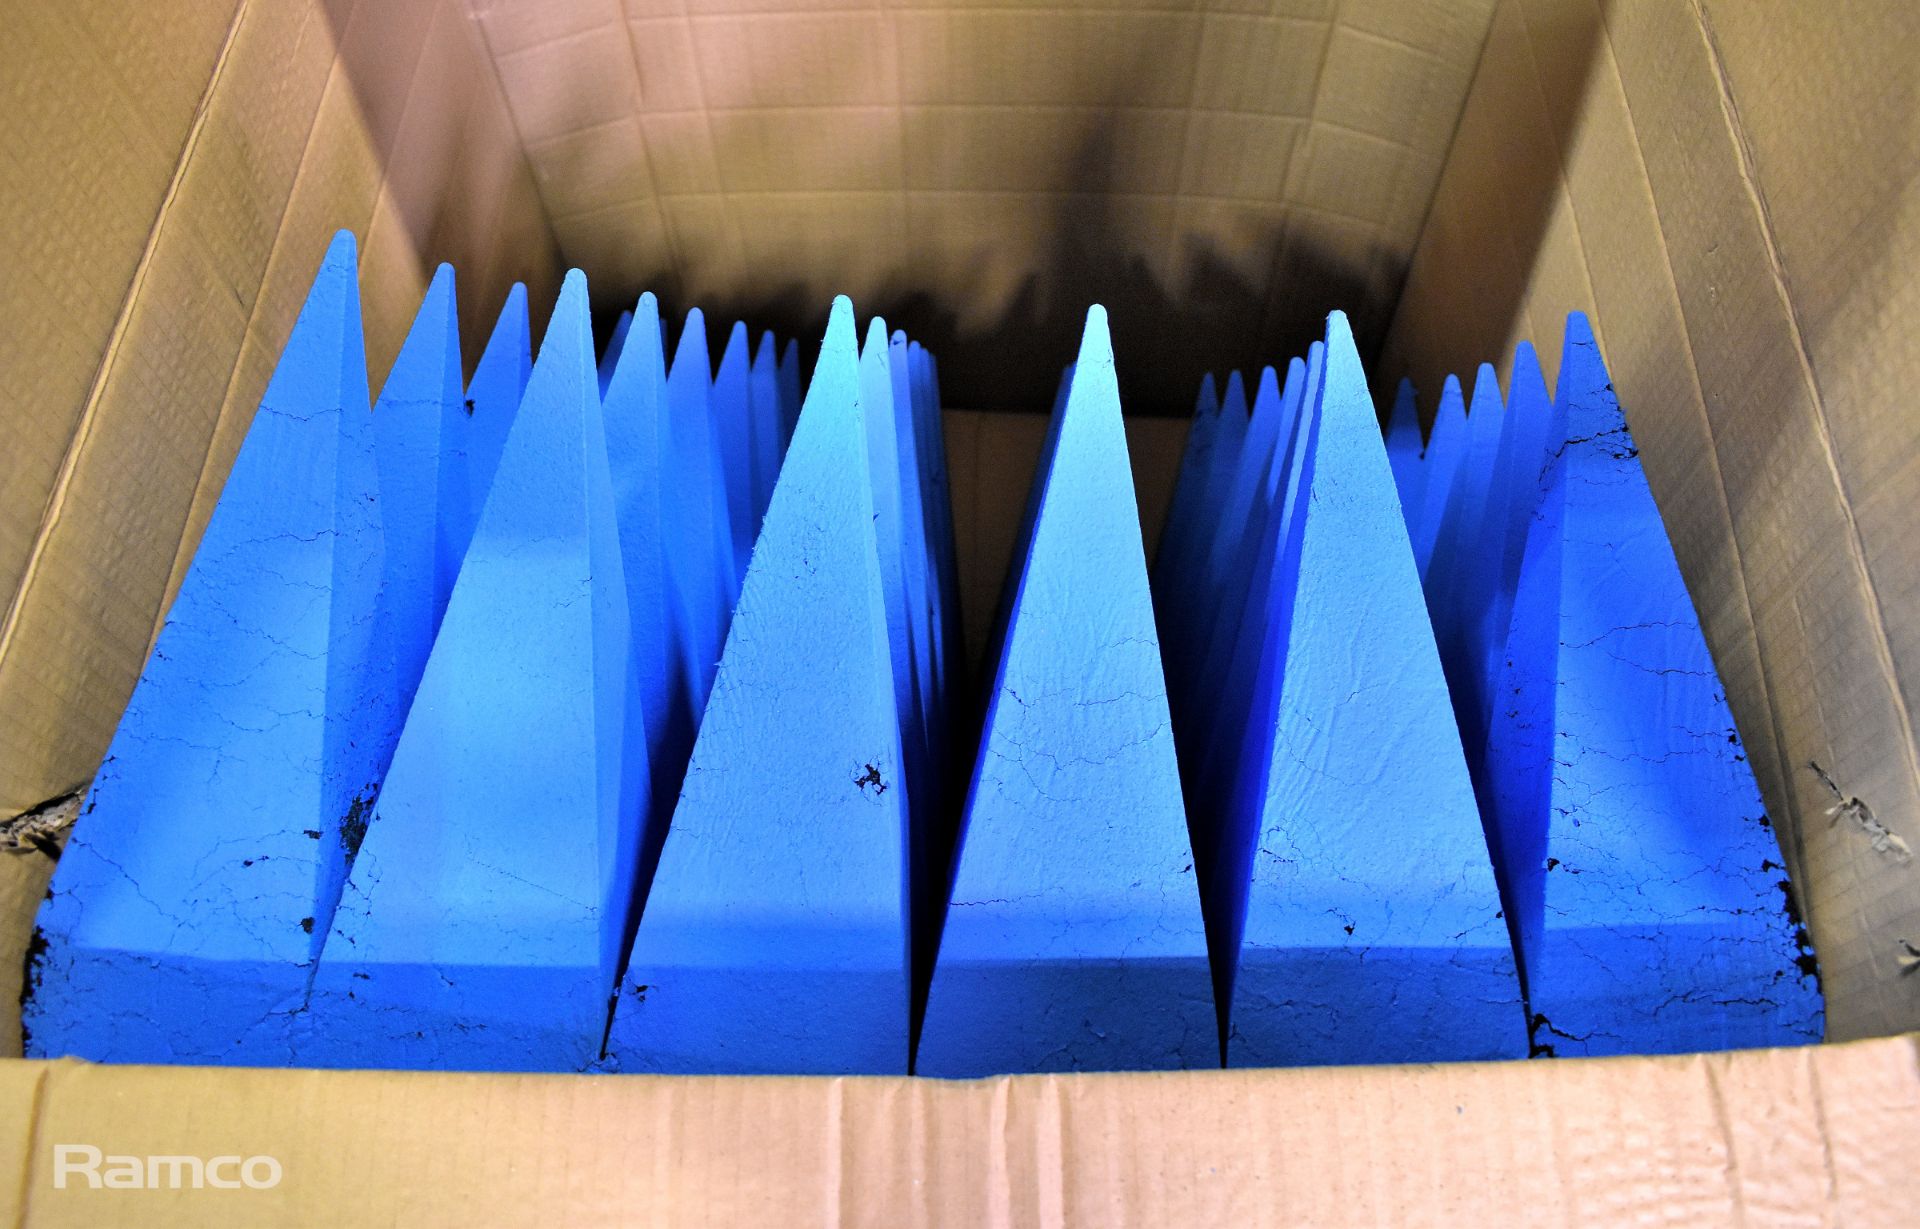 7x Anechoic Sound reducing foam panels - triangular prism design - dimensions in the description - Image 4 of 4